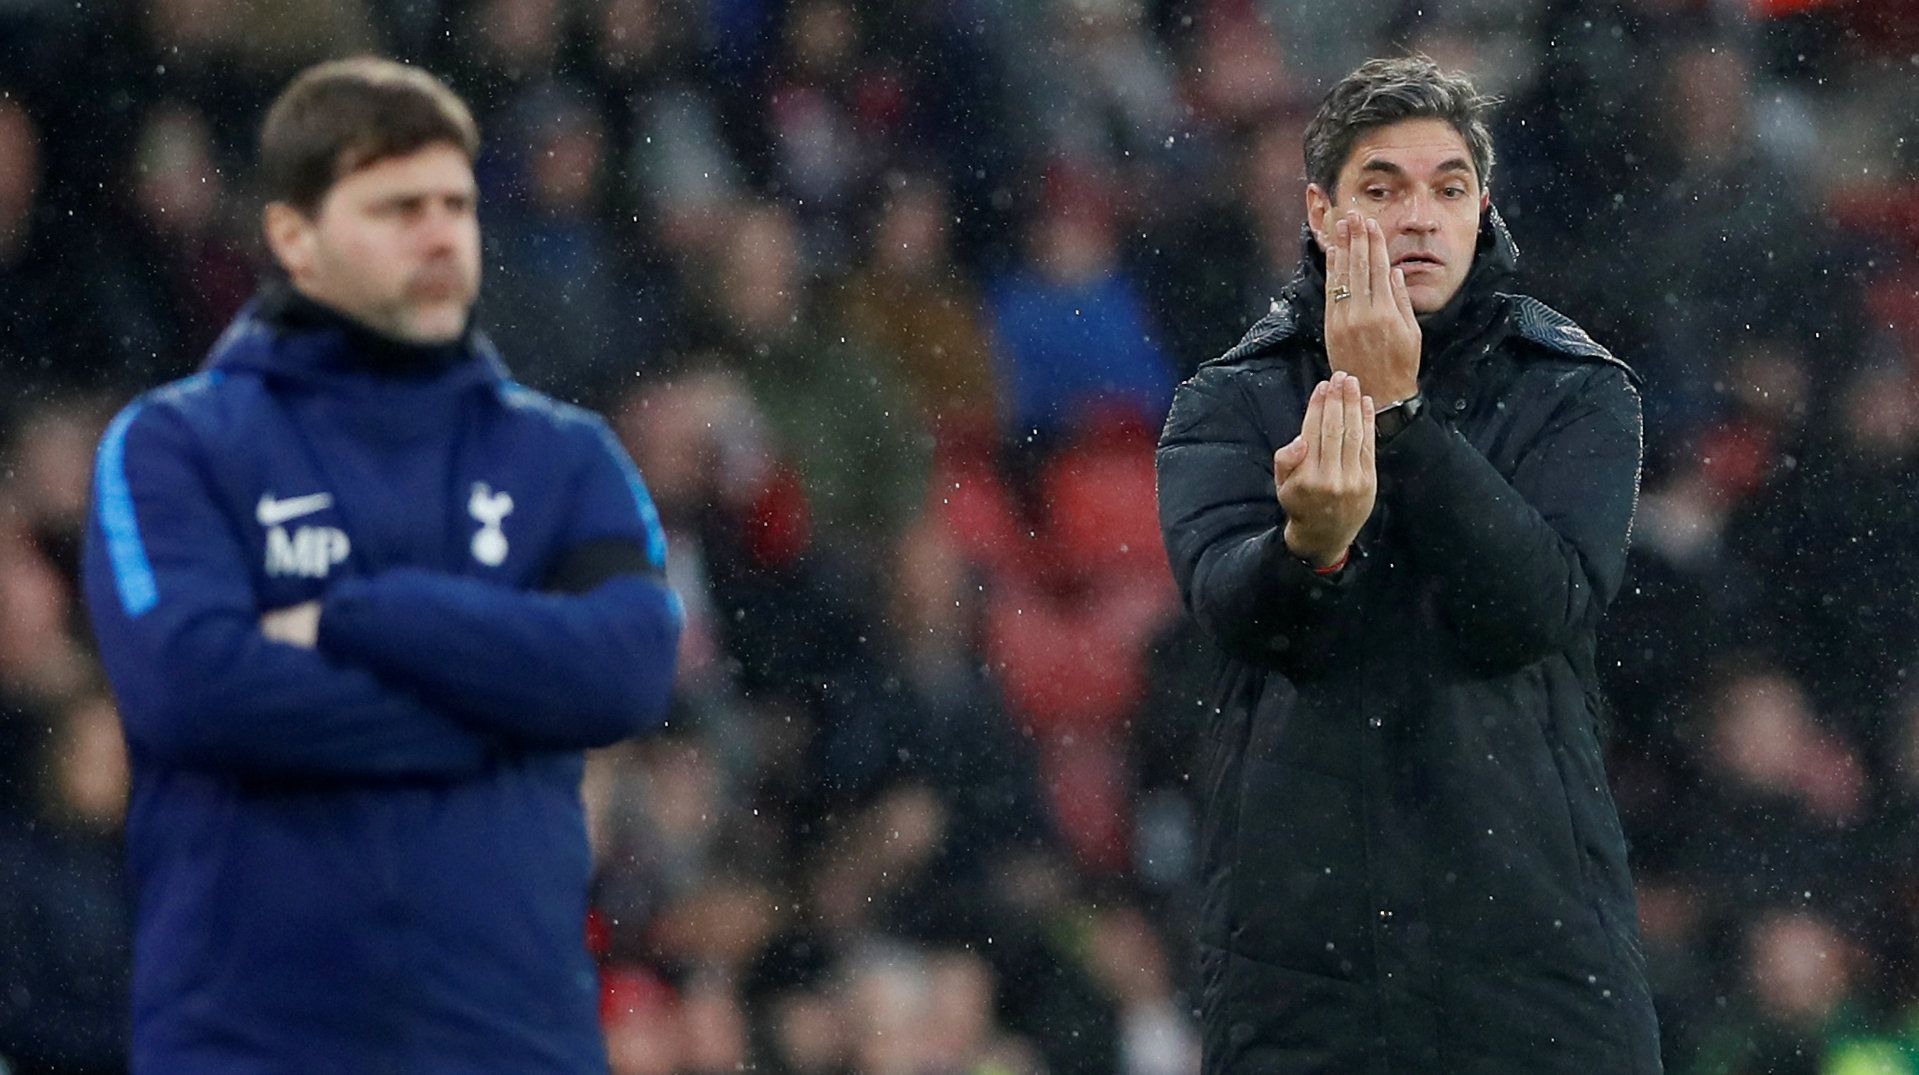 Soccer Football - Premier League - Southampton vs Tottenham Hotspur - St Mary's Stadium, Southampton, Britain - January 21, 2018   Southampton manager Mauricio Pellegrino and Tottenham manager Mauricio Pochettino        REUTERS/David Klein    EDITORIAL USE ONLY. No use with unauthorized audio, video, data, fixture lists, club/league logos or 